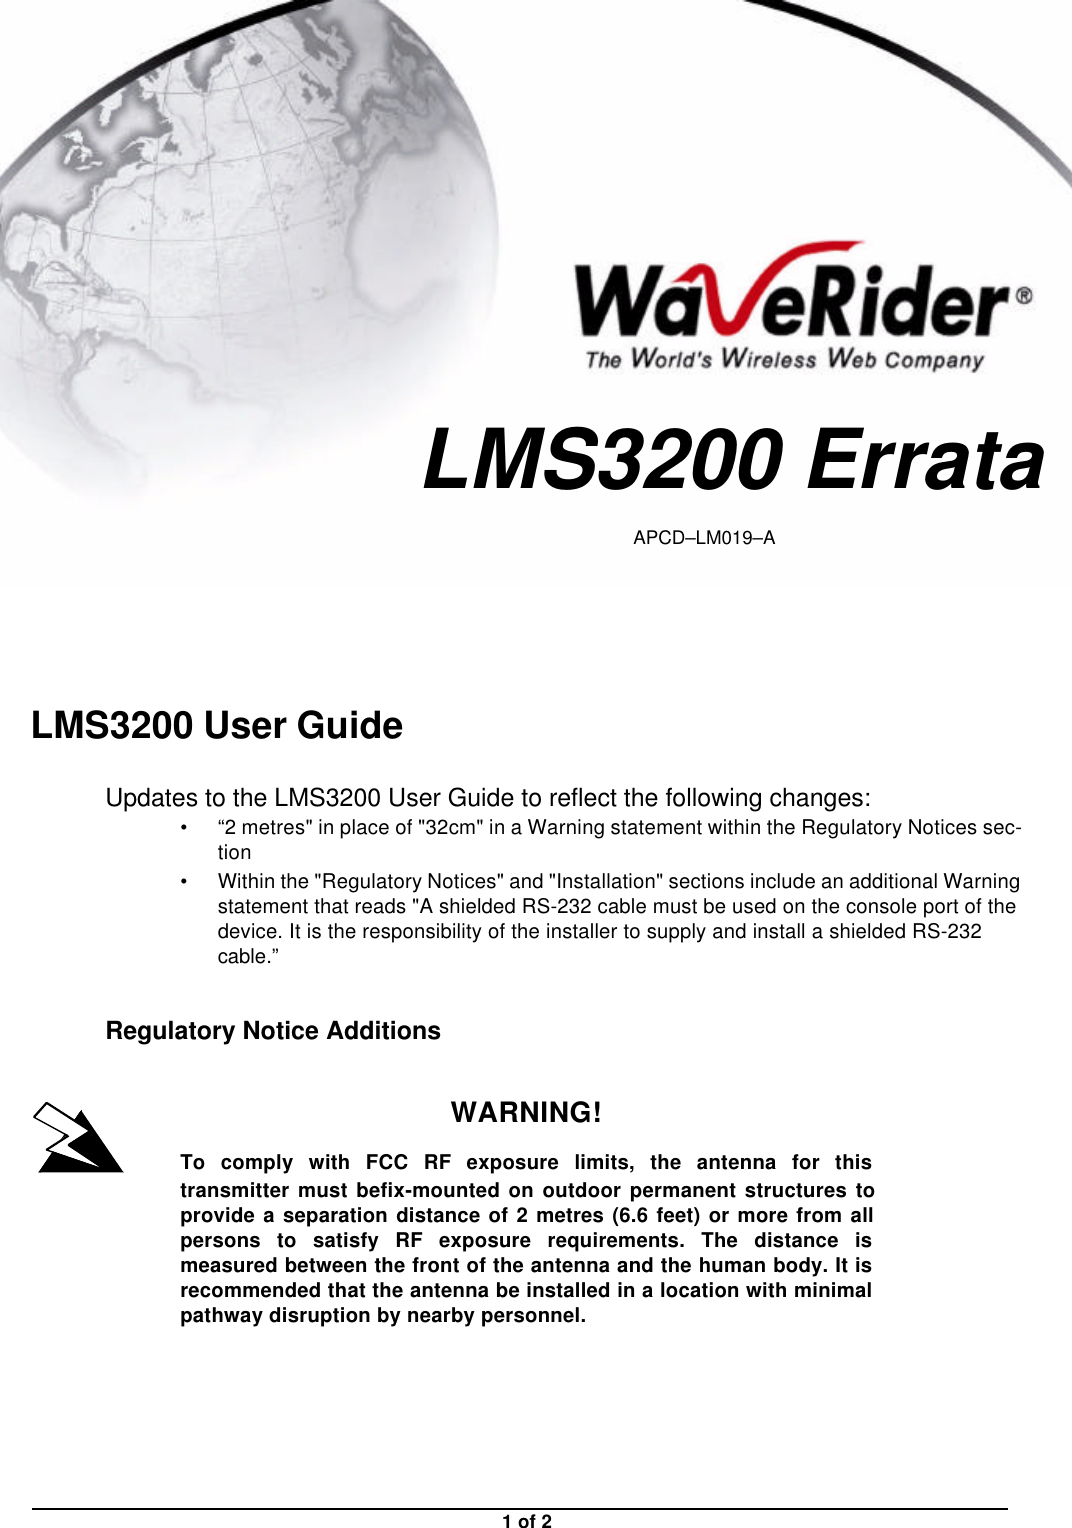 1 of 2LMS3200 User GuideUpdates to the LMS3200 User Guide to reflect the following changes:•“2 metres&quot; in place of &quot;32cm&quot; in a Warning statement within the Regulatory Notices sec-tion•Within the &quot;Regulatory Notices&quot; and &quot;Installation&quot; sections include an additional Warning statement that reads &quot;A shielded RS-232 cable must be used on the console port of the device. It is the responsibility of the installer to supply and install a shielded RS-232 cable.”Regulatory Notice AdditionsWARNING!To comply with FCC RF exposure limits, the antenna for thistransmitter must befix-mounted on outdoor permanent structures toprovide a separation distance of 2 metres (6.6 feet) or more from allpersons to satisfy RF exposure requirements. The distance ismeasured between the front of the antenna and the human body. It isrecommended that the antenna be installed in a location with minimalpathway disruption by nearby personnel.LMS3200 ErrataAPCD–LM019–A